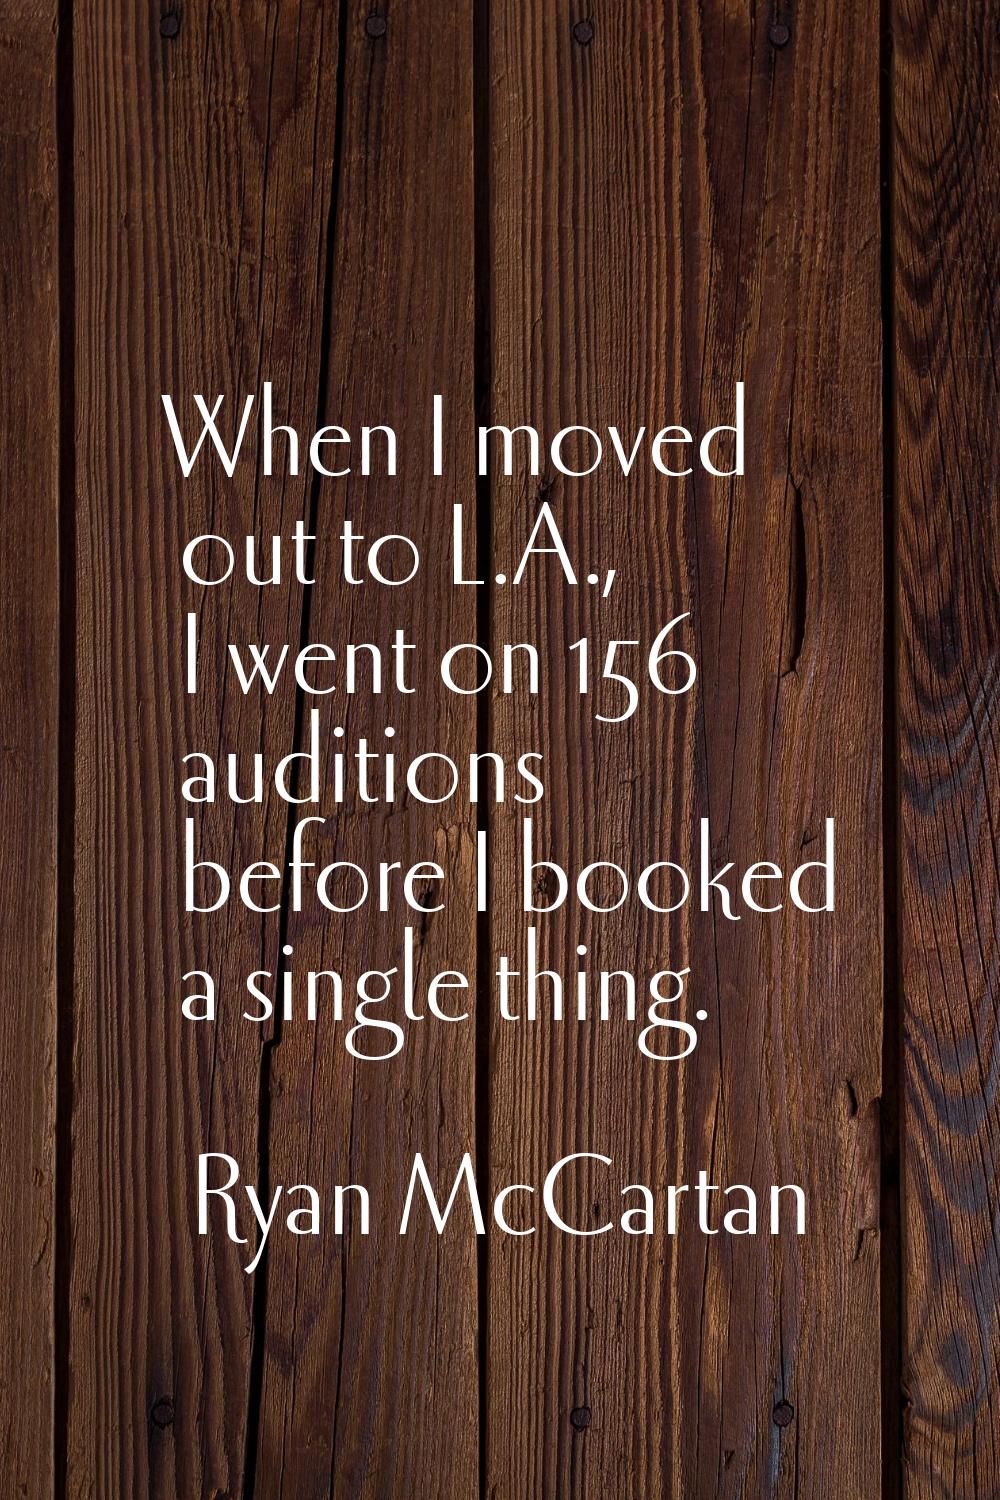 When I moved out to L.A., I went on 156 auditions before I booked a single thing.